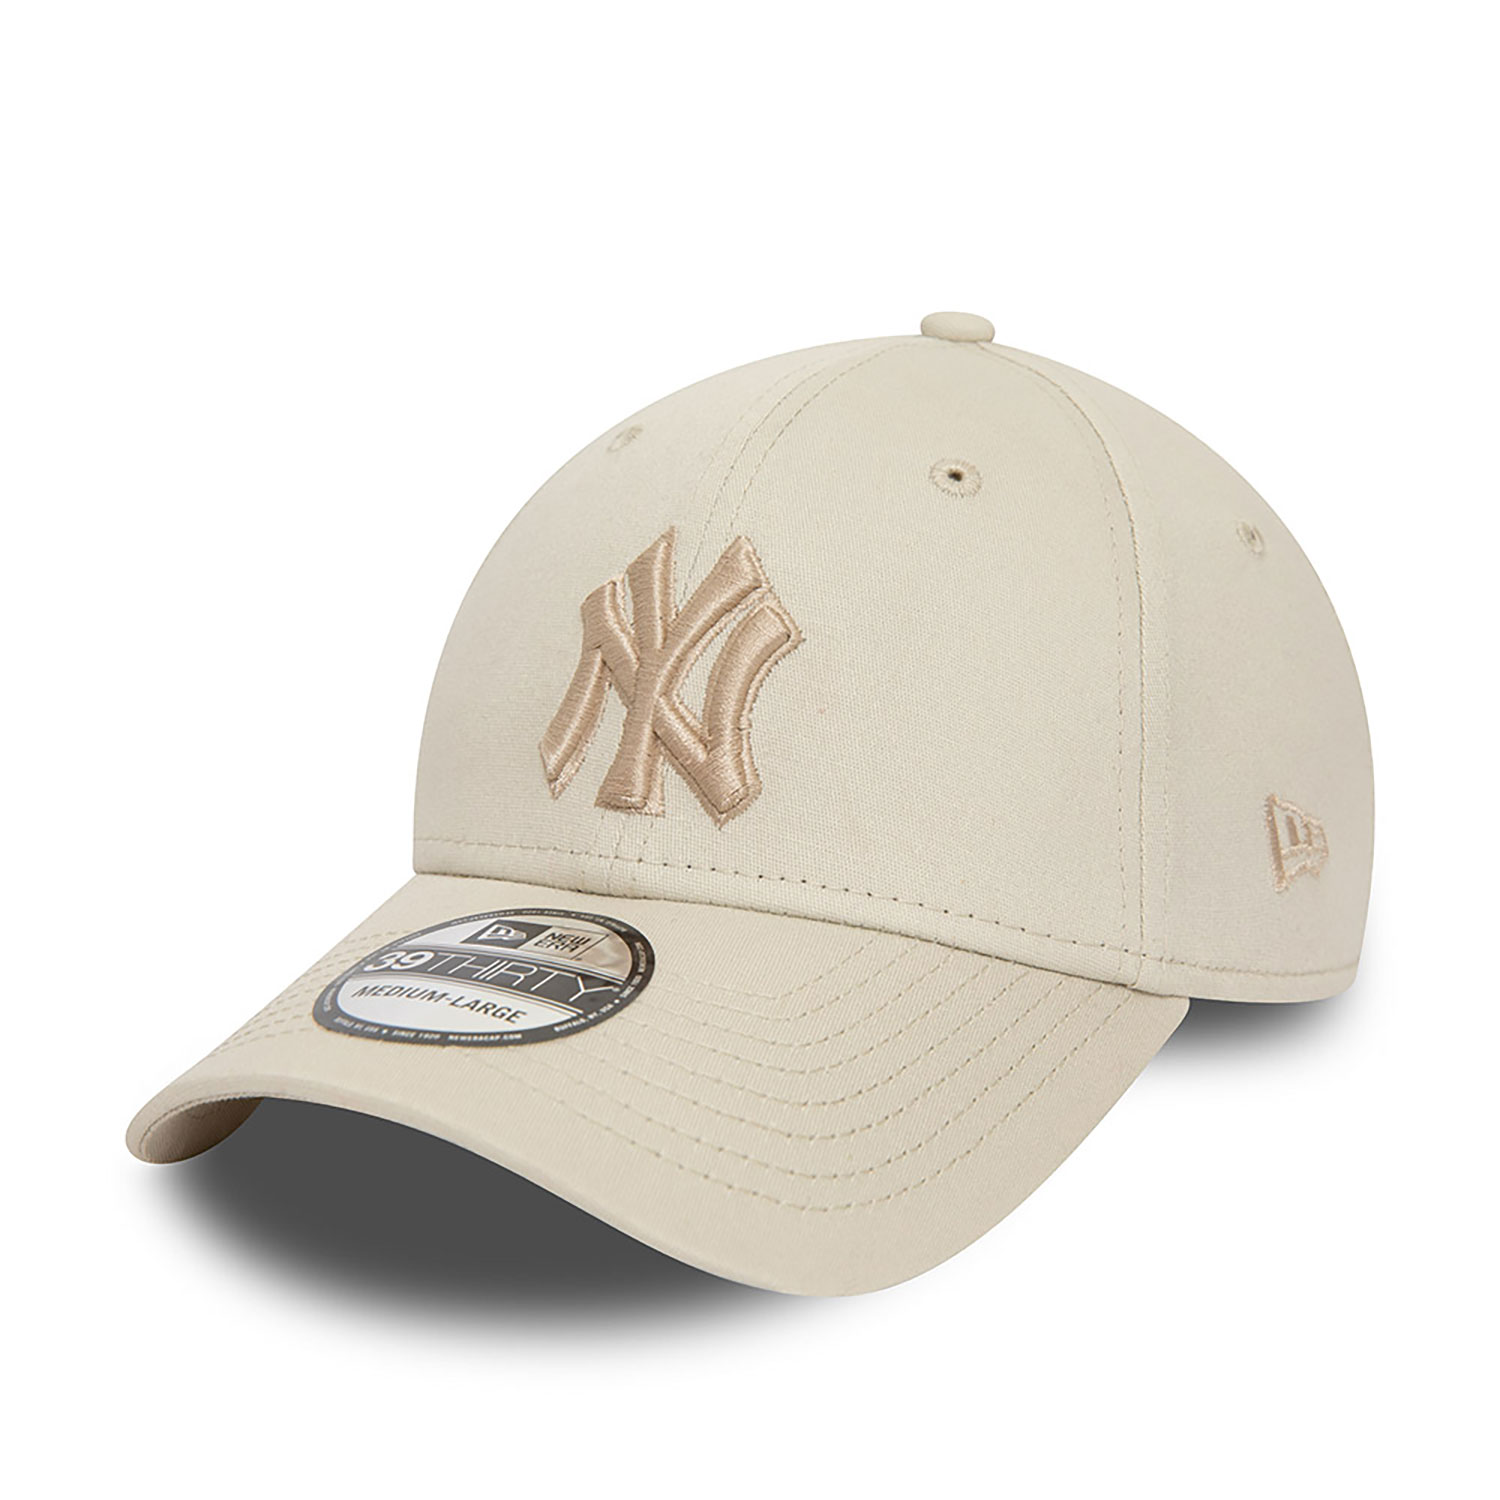 New York Yankees MLB Outline Stone 39THIRTY Stretch Fit Cap